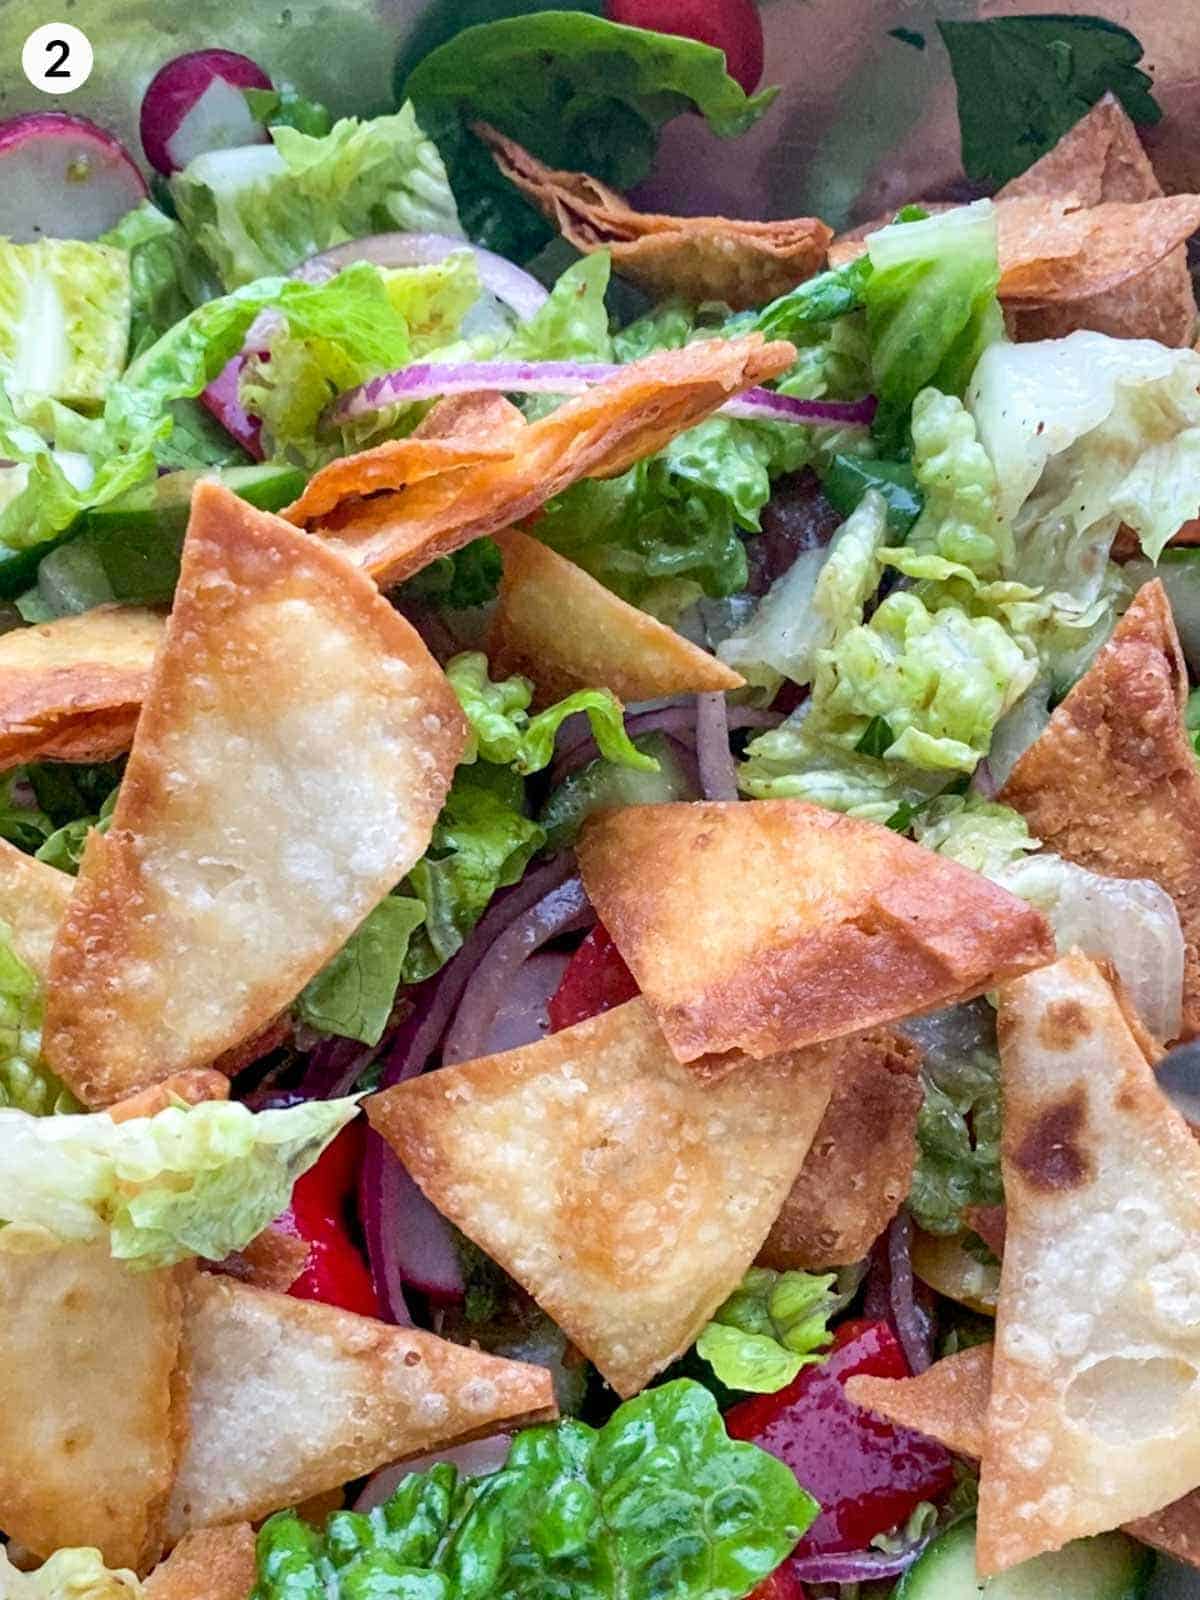 Mixing the ingredients of a Fattoush Salad with fried flat bread